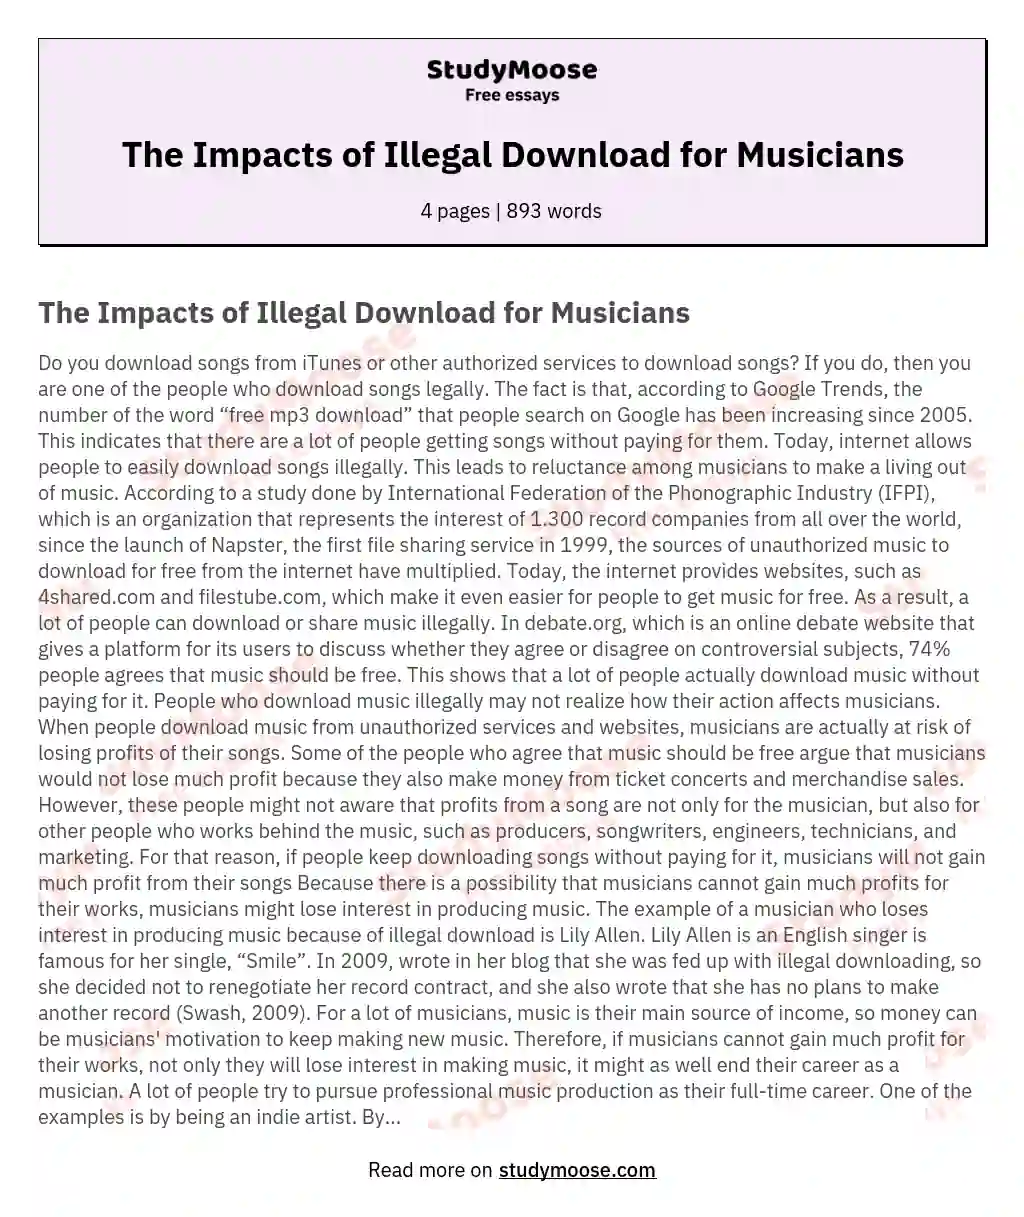 The Impacts of Illegal Download for Musicians essay